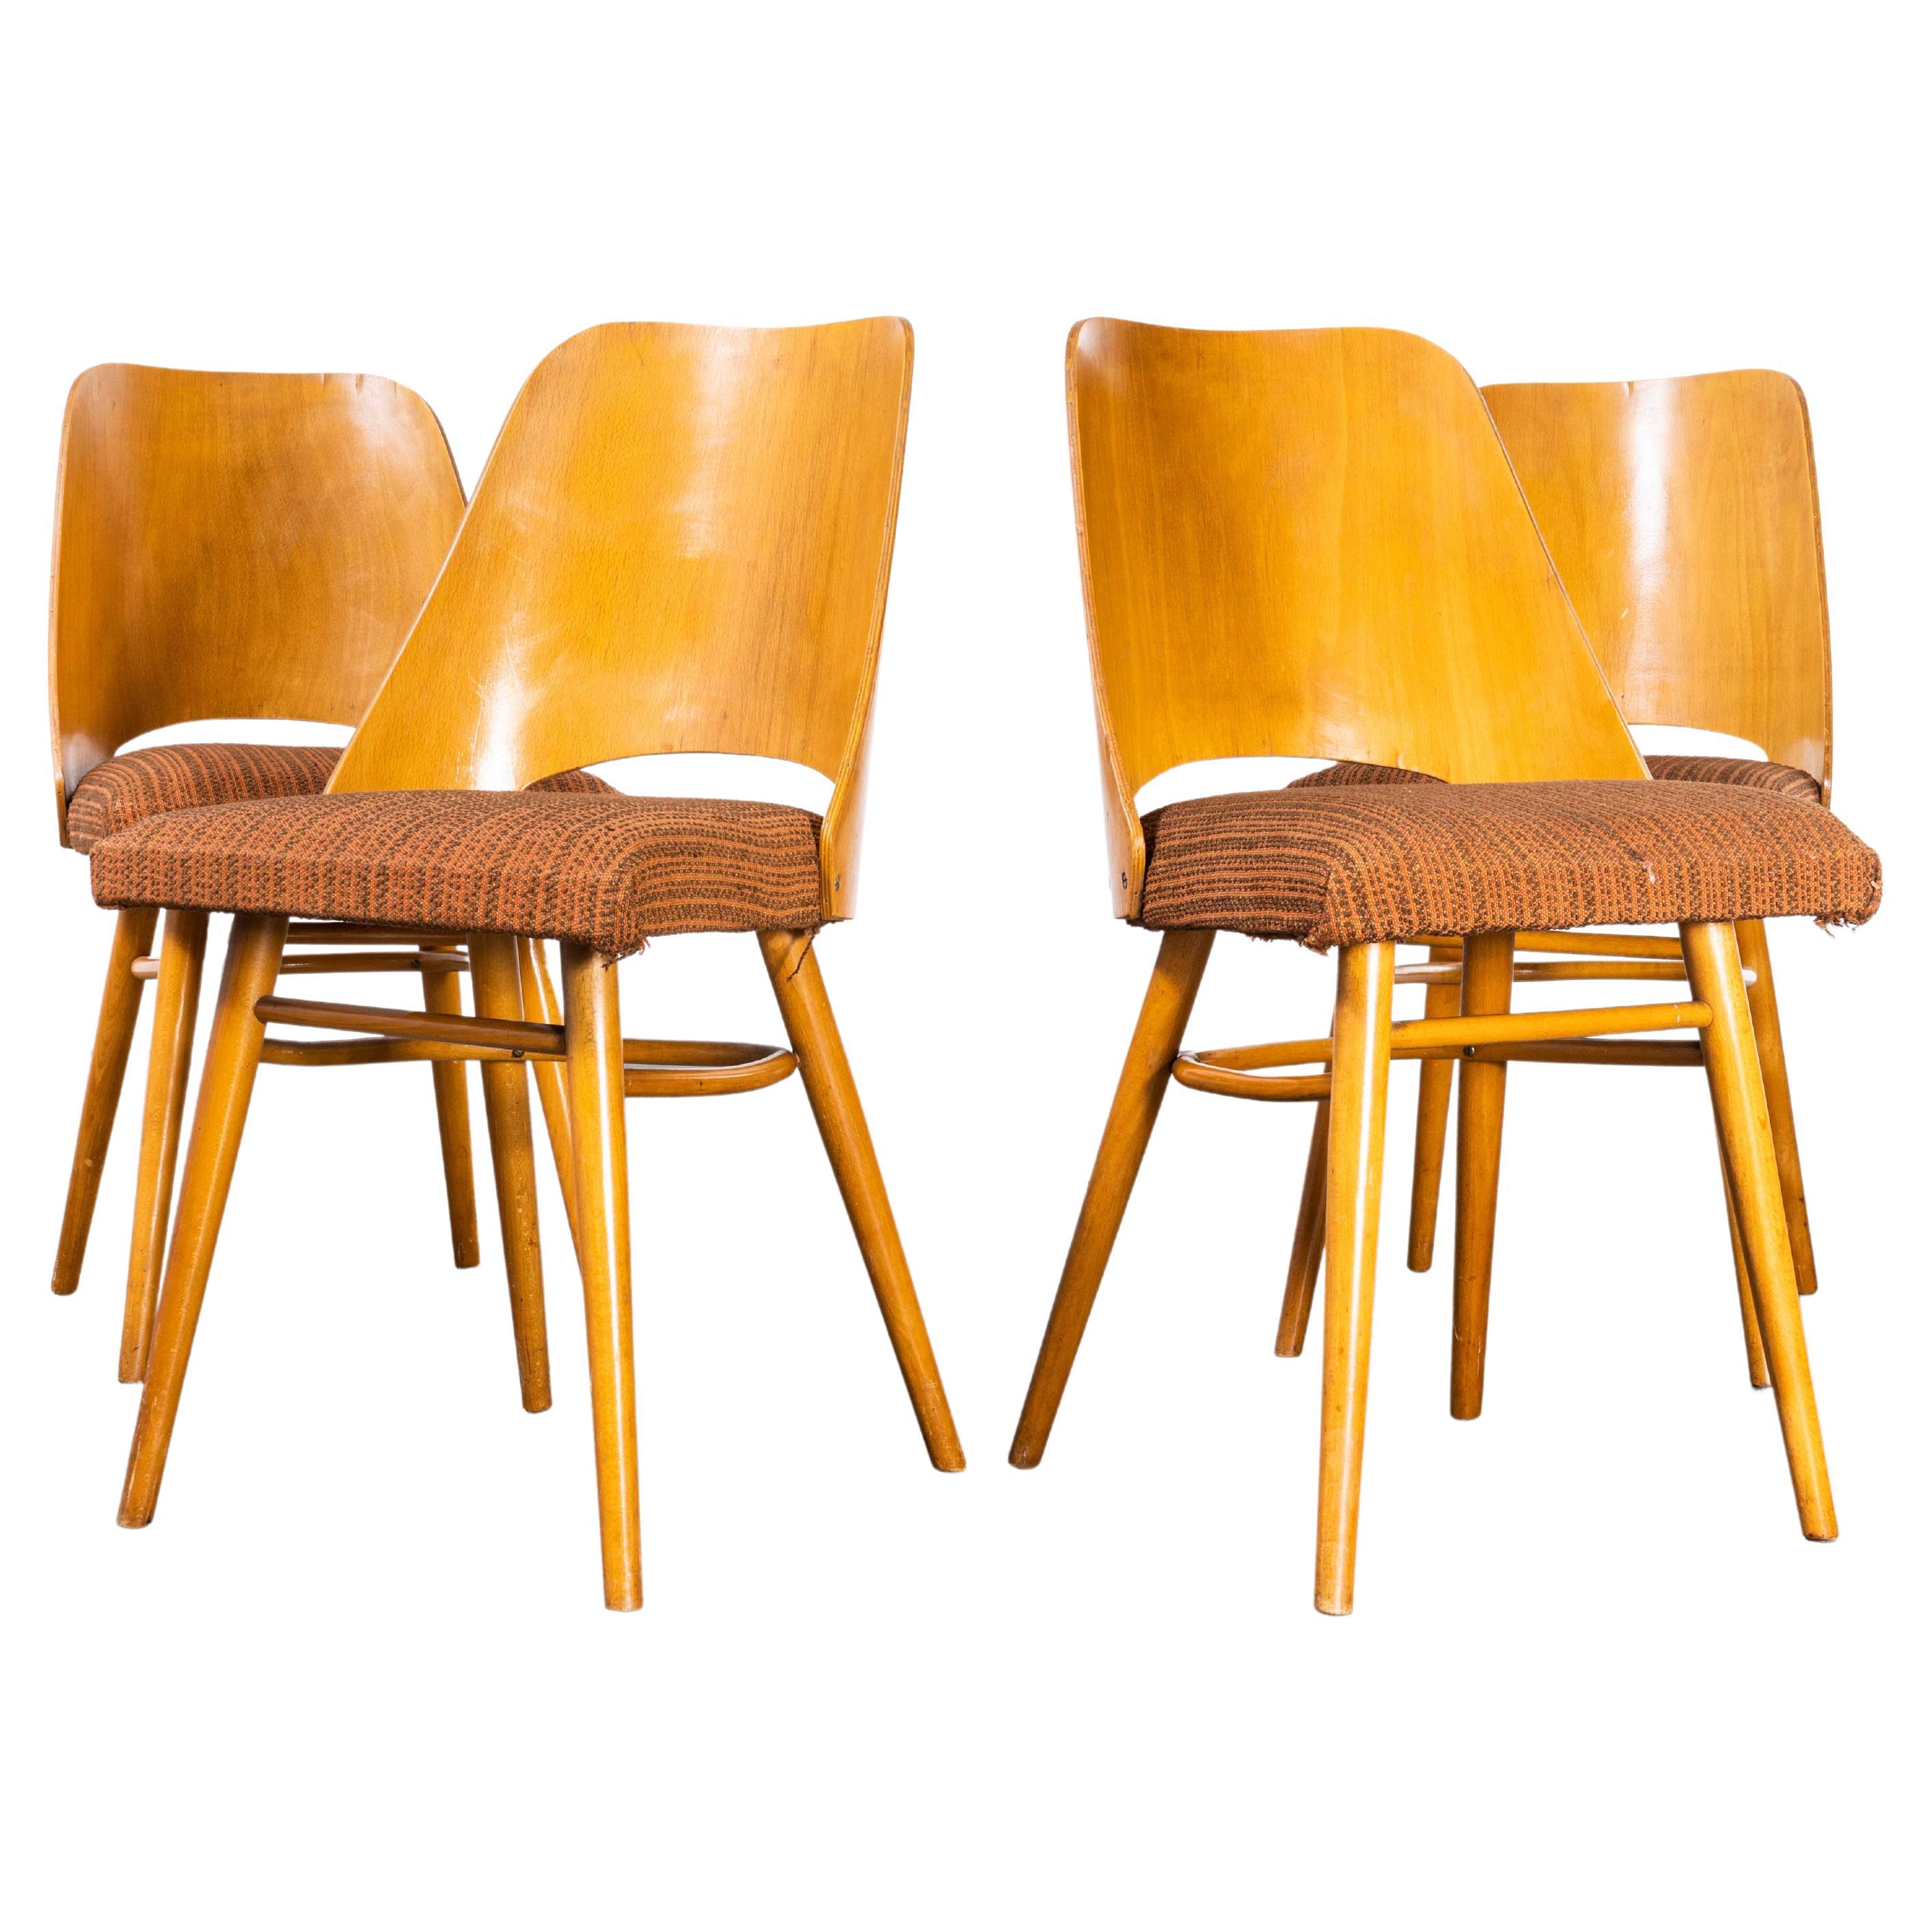 1950's Upholstered Thon Dining Chairs By Radomir Hoffman - Set Of Four (1879)